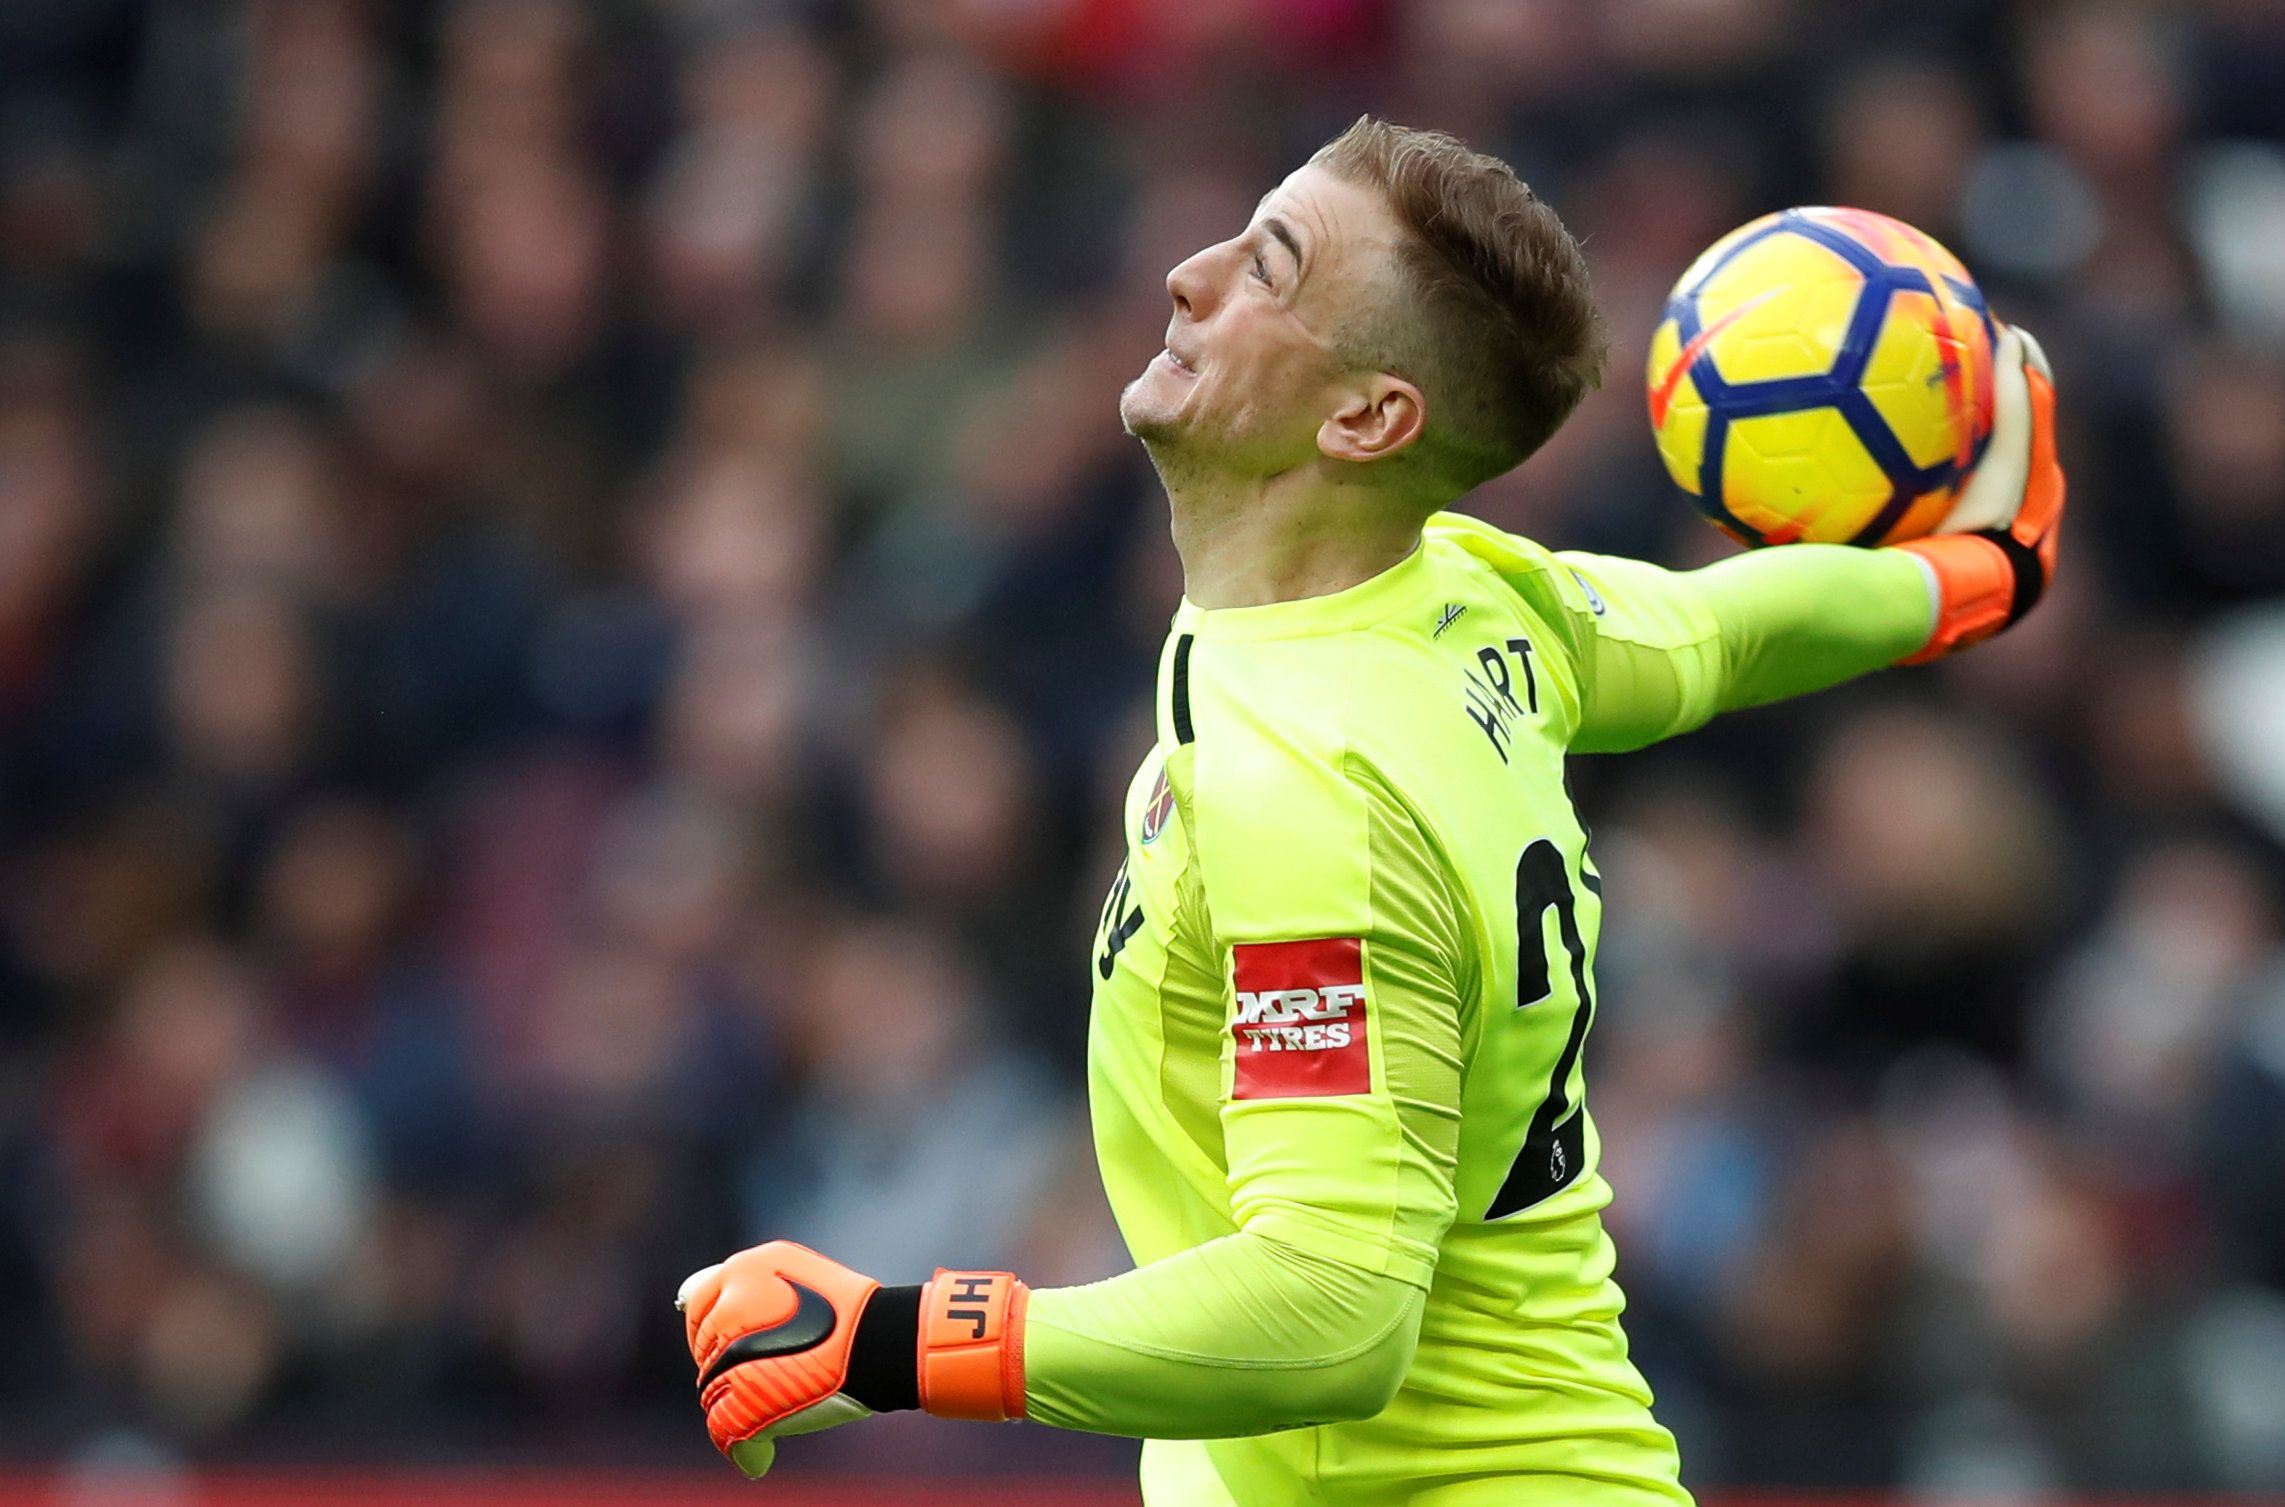 Soccer Football - Premier League - West Ham United vs Burnley - London Stadium, London, Britain - March 10, 2018   West Ham United's Joe Hart in action   Action Images via Reuters/Peter Cziborra    EDITORIAL USE ONLY. No use with unauthorized audio, video, data, fixture lists, club/league logos or 